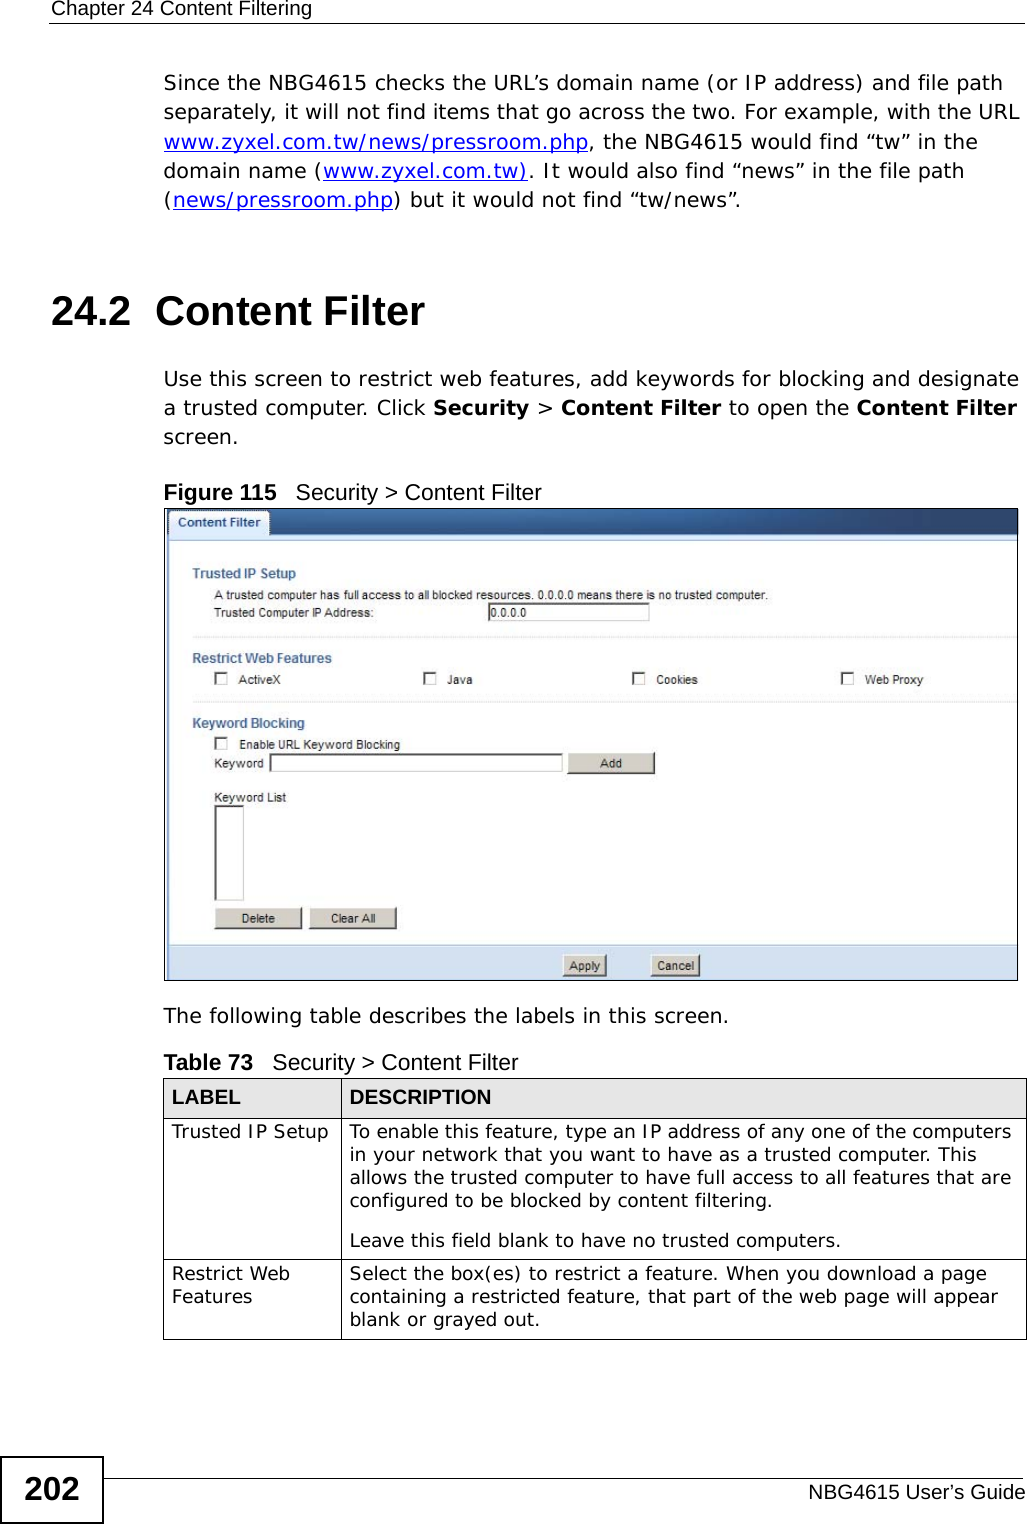 Chapter 24 Content FilteringNBG4615 User’s Guide202Since the NBG4615 checks the URL’s domain name (or IP address) and file path separately, it will not find items that go across the two. For example, with the URL www.zyxel.com.tw/news/pressroom.php, the NBG4615 would find “tw” in the domain name (www.zyxel.com.tw). It would also find “news” in the file path (news/pressroom.php) but it would not find “tw/news”.24.2  Content FilterUse this screen to restrict web features, add keywords for blocking and designate a trusted computer. Click Security &gt; Content Filter to open the Content Filter screen. Figure 115   Security &gt; Content Filter The following table describes the labels in this screen.Table 73   Security &gt; Content Filter LABEL DESCRIPTIONTrusted IP Setup To enable this feature, type an IP address of any one of the computers in your network that you want to have as a trusted computer. This allows the trusted computer to have full access to all features that are configured to be blocked by content filtering.Leave this field blank to have no trusted computers.Restrict Web Features Select the box(es) to restrict a feature. When you download a page containing a restricted feature, that part of the web page will appear blank or grayed out.